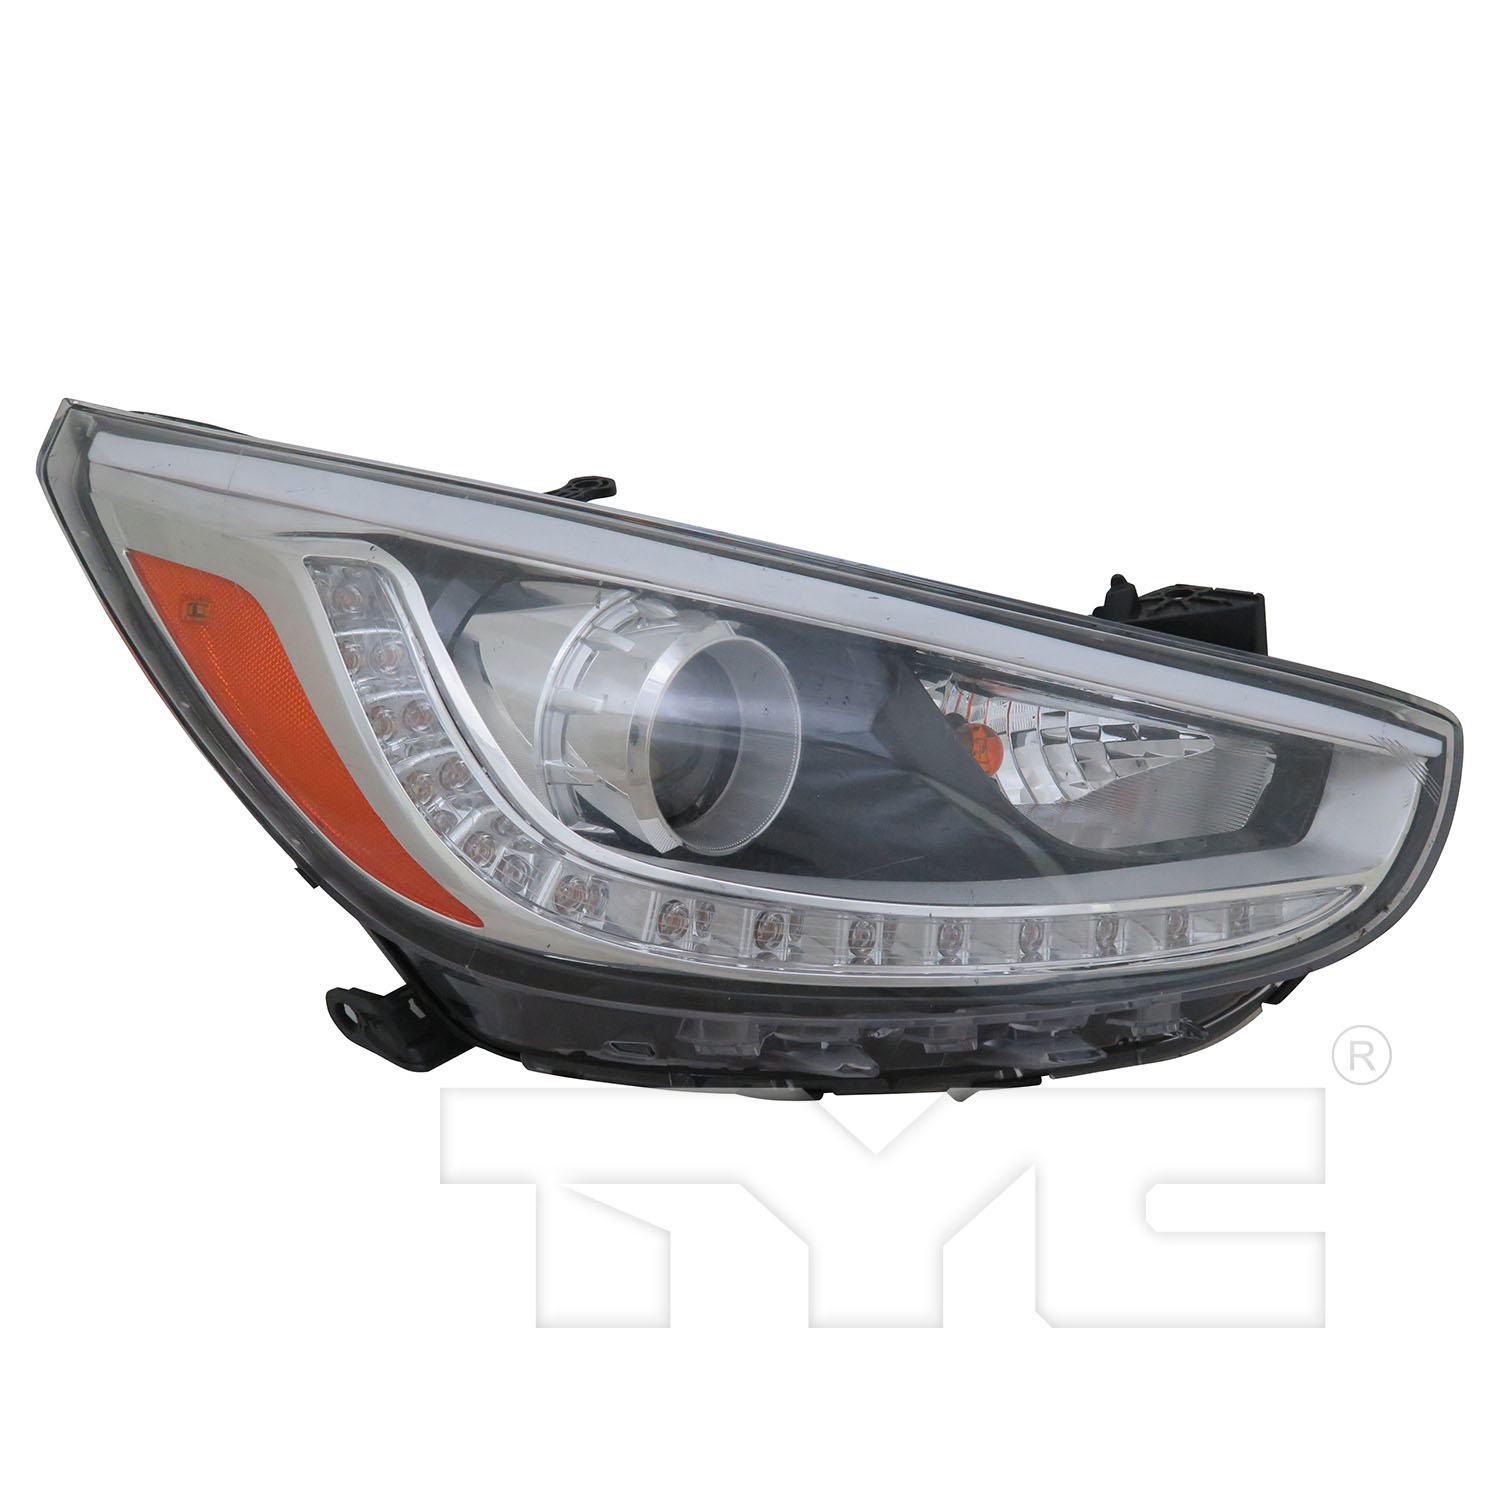 Aftermarket HEADLIGHTS for HYUNDAI - ACCENT, ACCENT,12-17,RT Headlamp assy composite